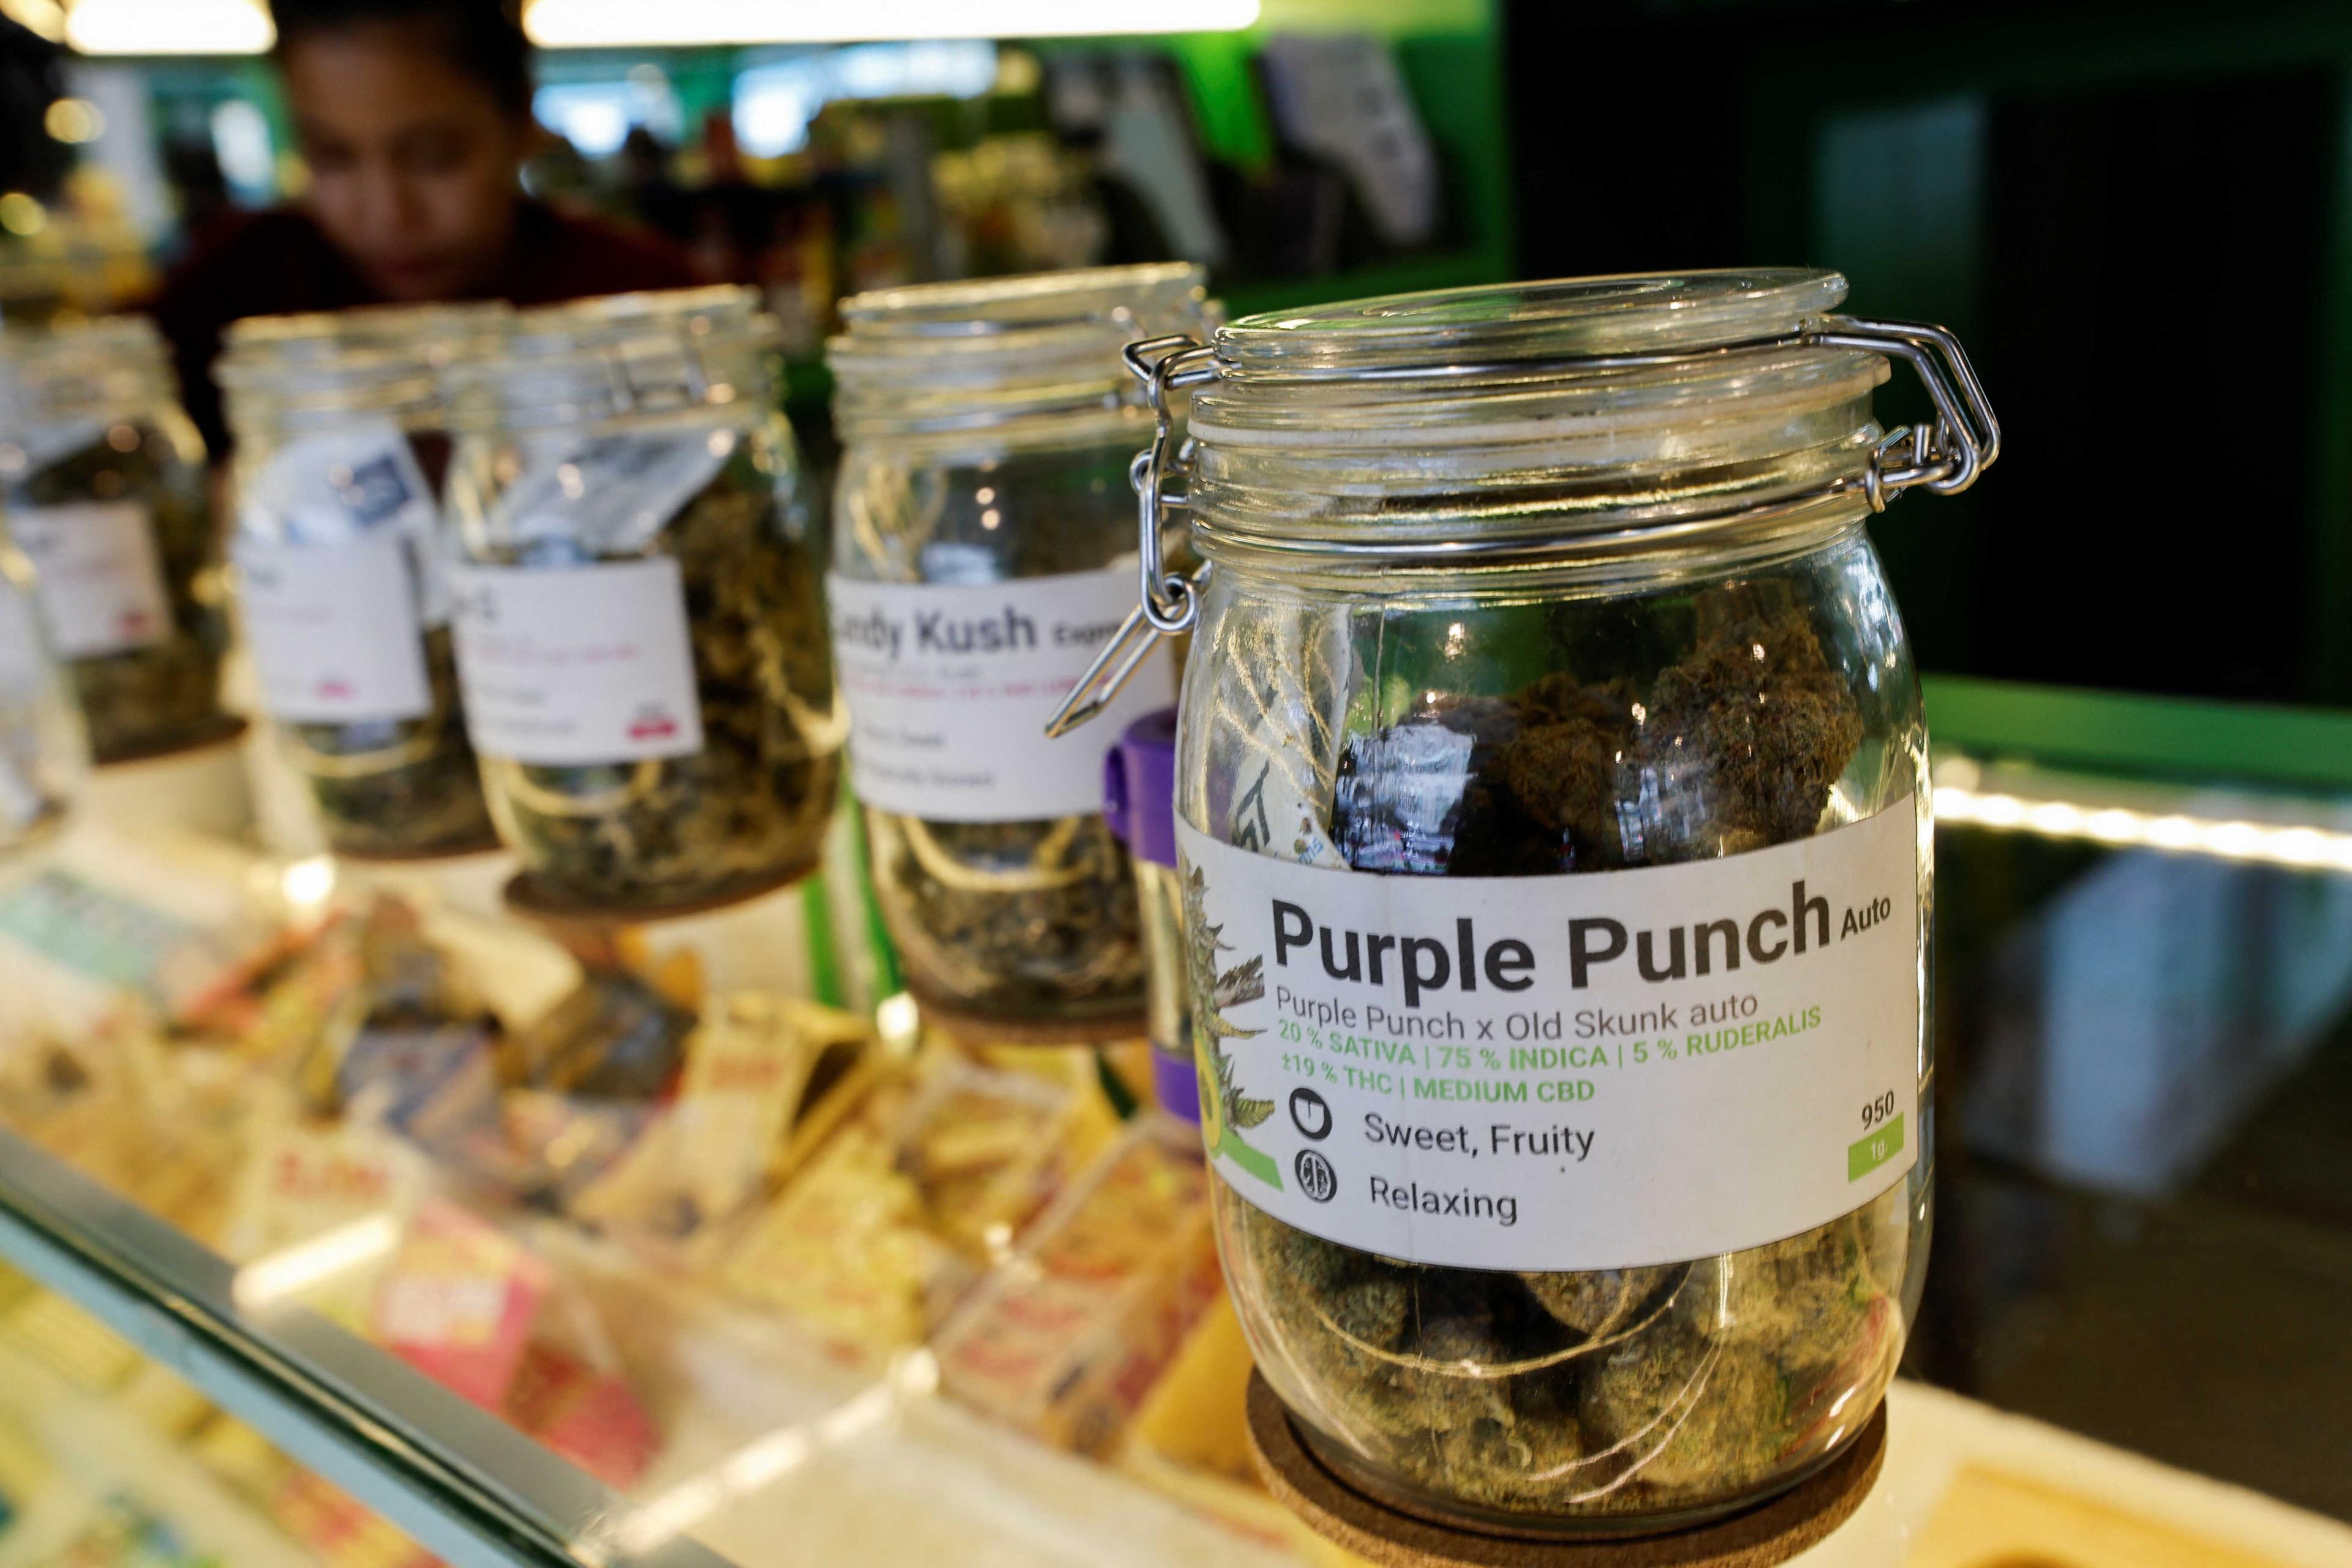 Jars containing marijuana are seen at Royal Queen Seeds, a cannabis shop next to the venue of the Asia-Pacific Economic Cooperation Summit in Bangkok, Thailand Nov 17. Photo: Reuters